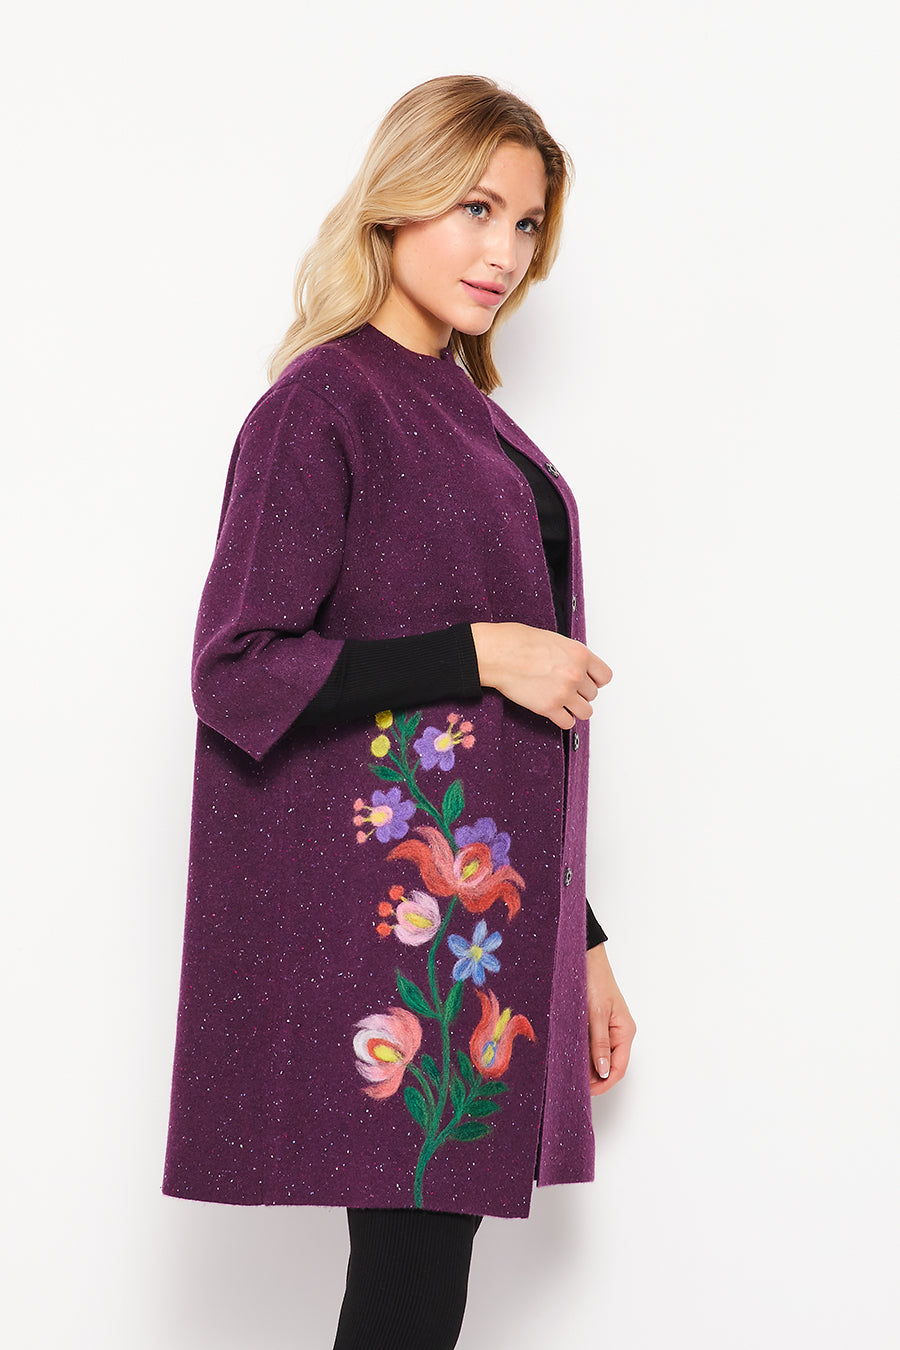 The Floral Coat